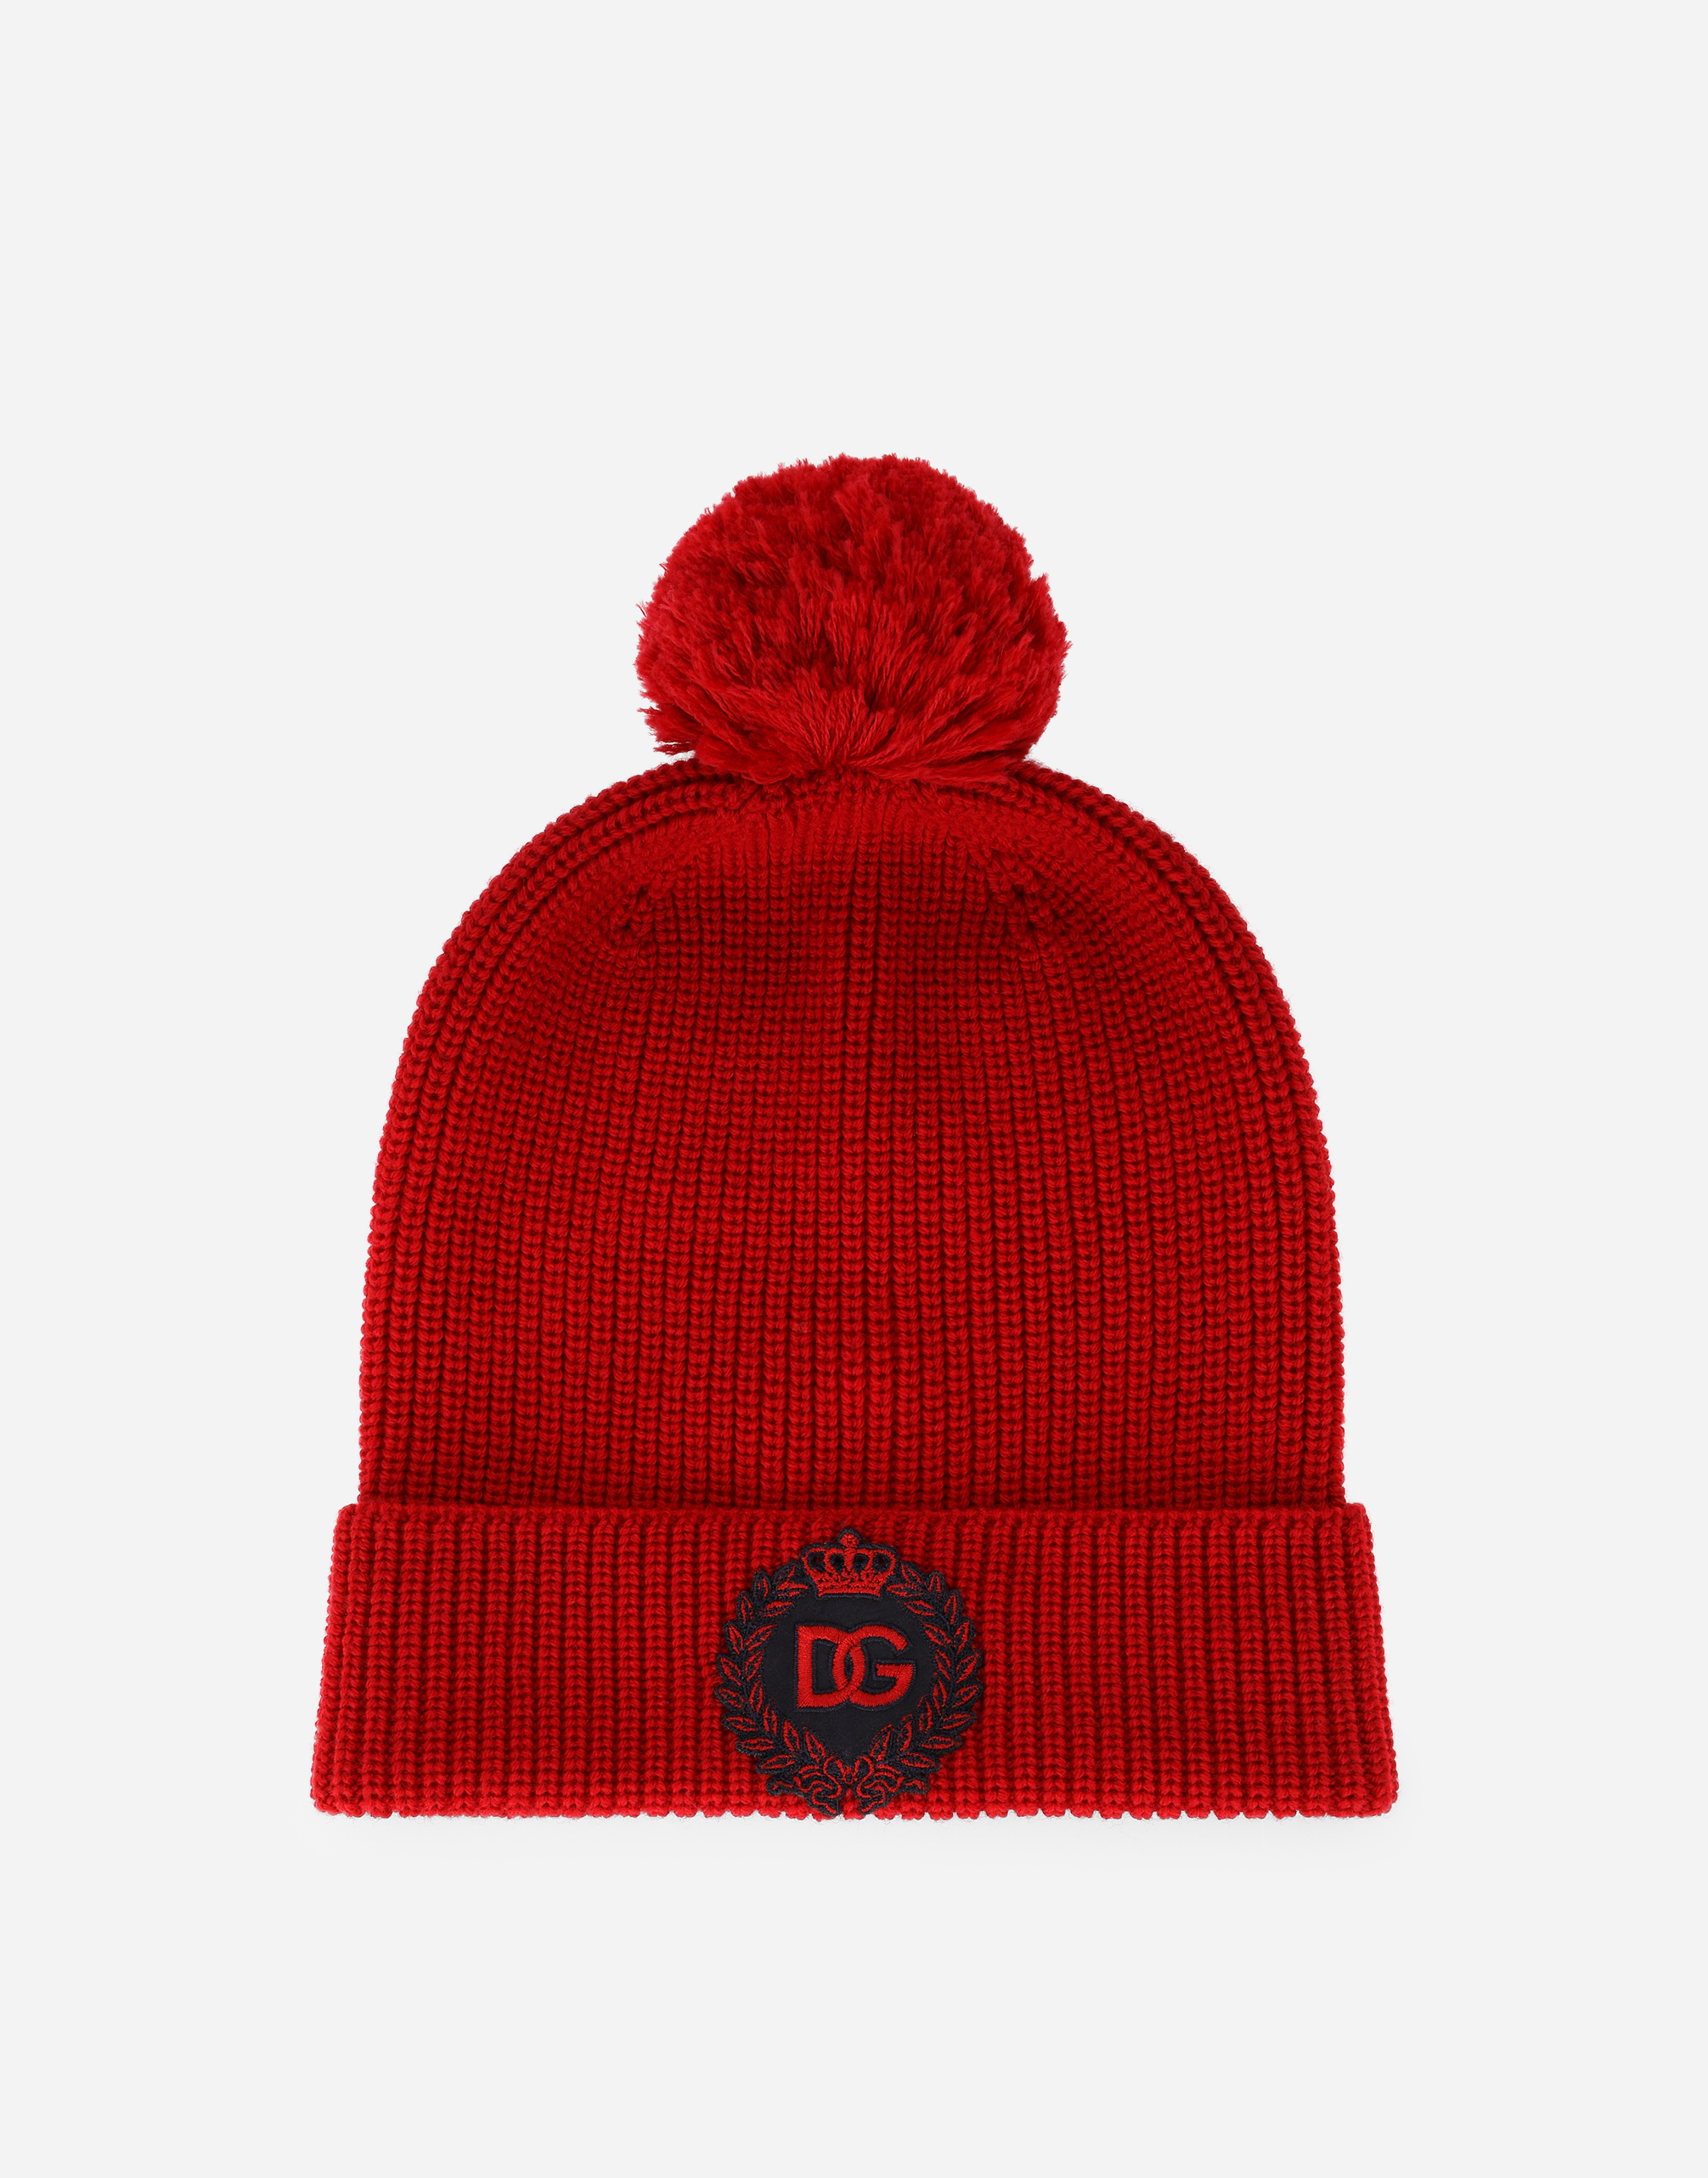 Knit hat with DG patch in Red